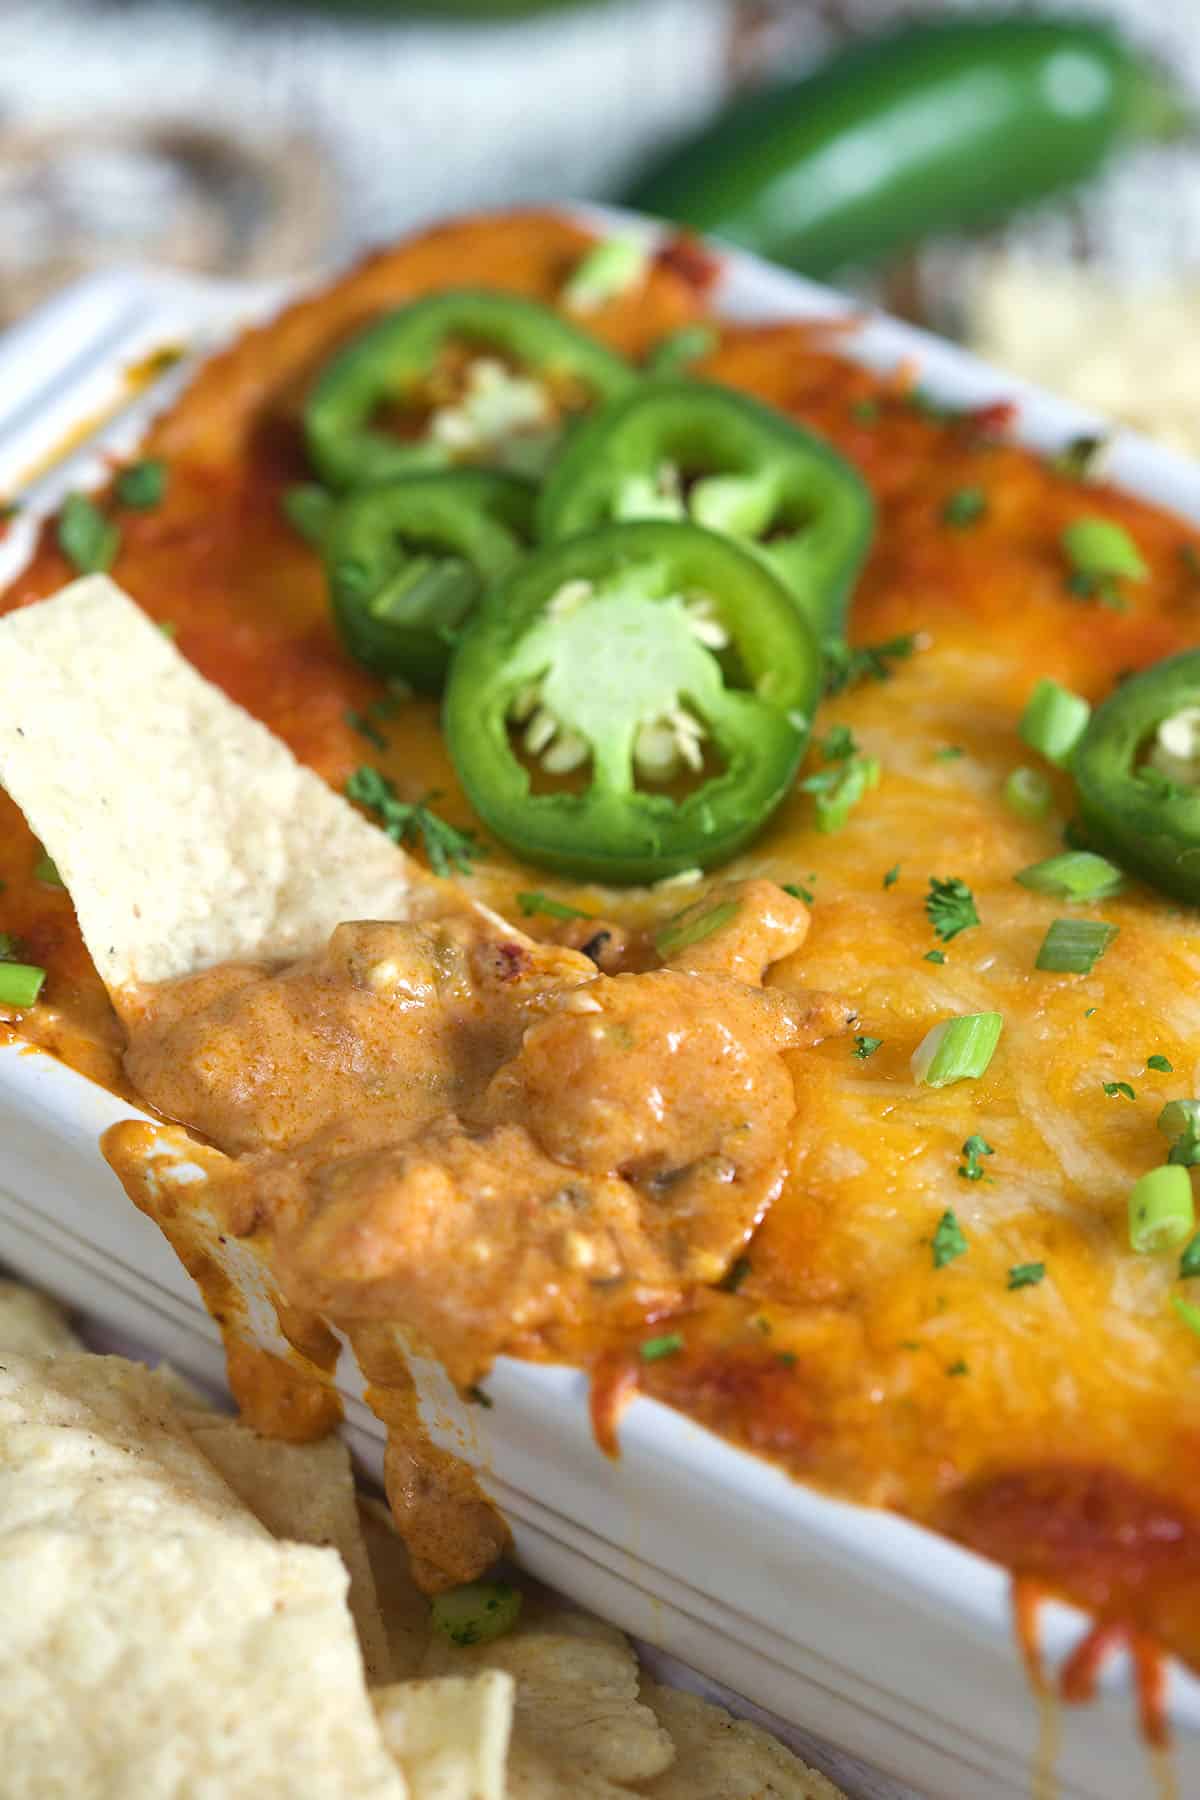 Chili cheese dip with a chip in it.